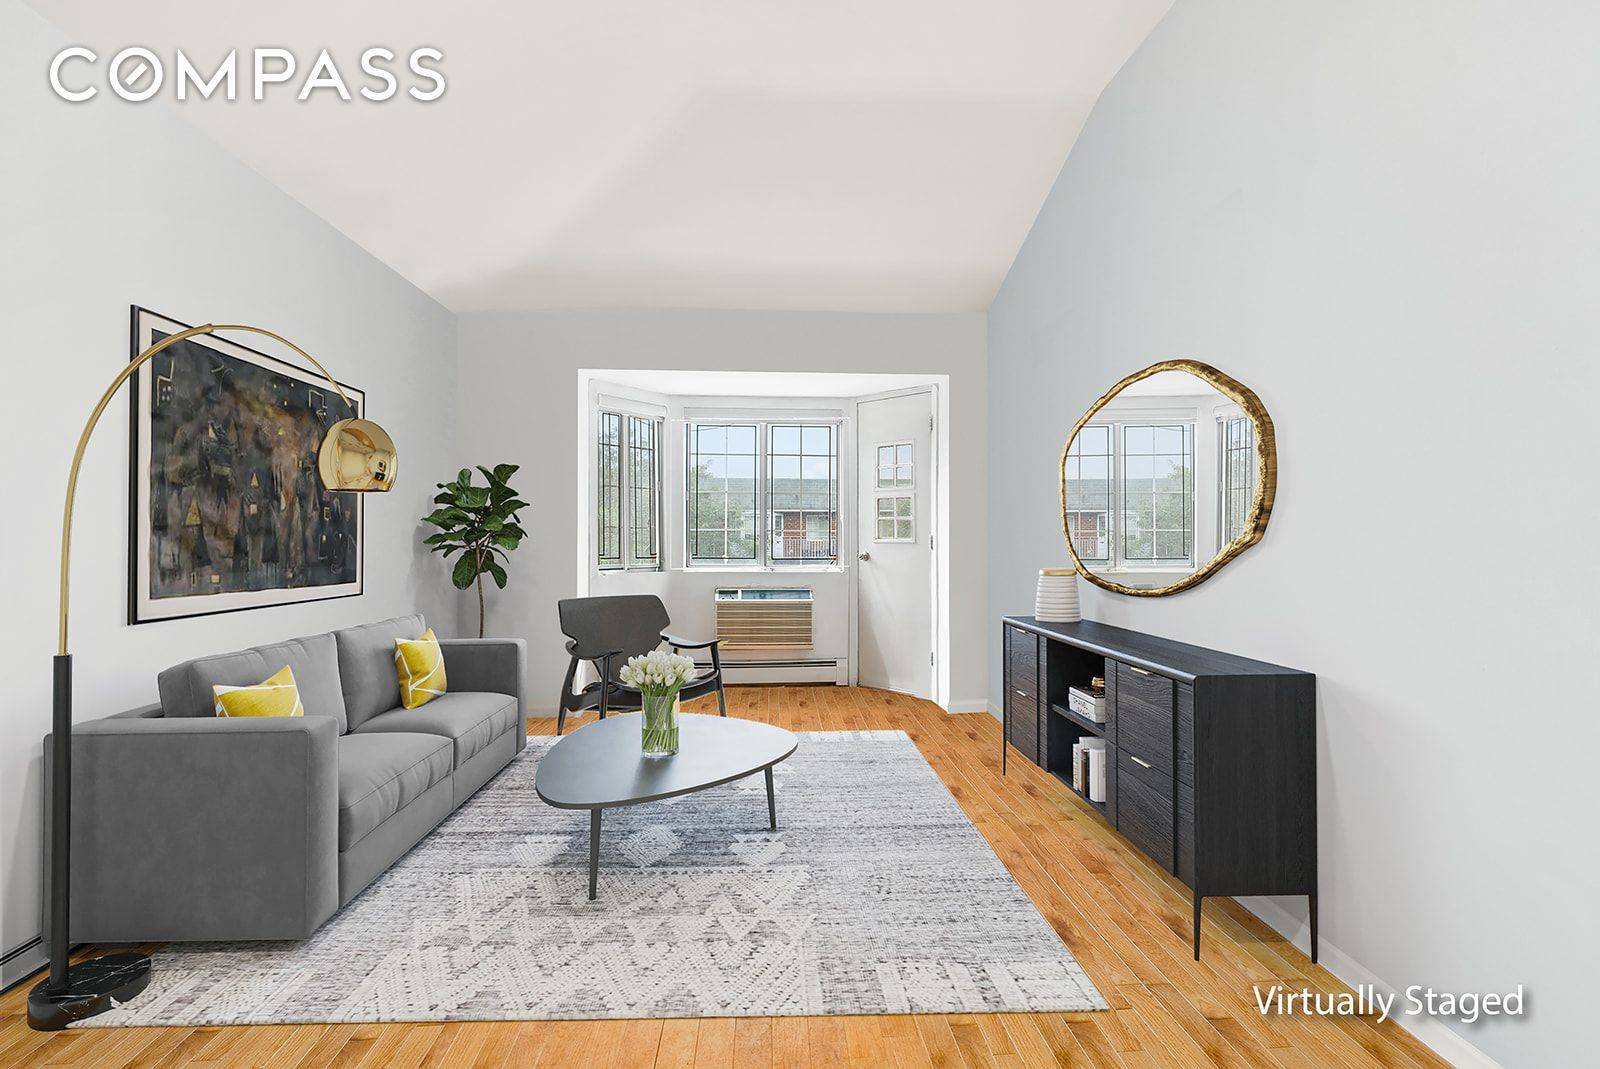 Charming Condo in Georgetown, Brooklyn Welcome to this delightful 3 bedroom, 2 bathroom condo nestled in the heart of Georgetown, Brooklyn.